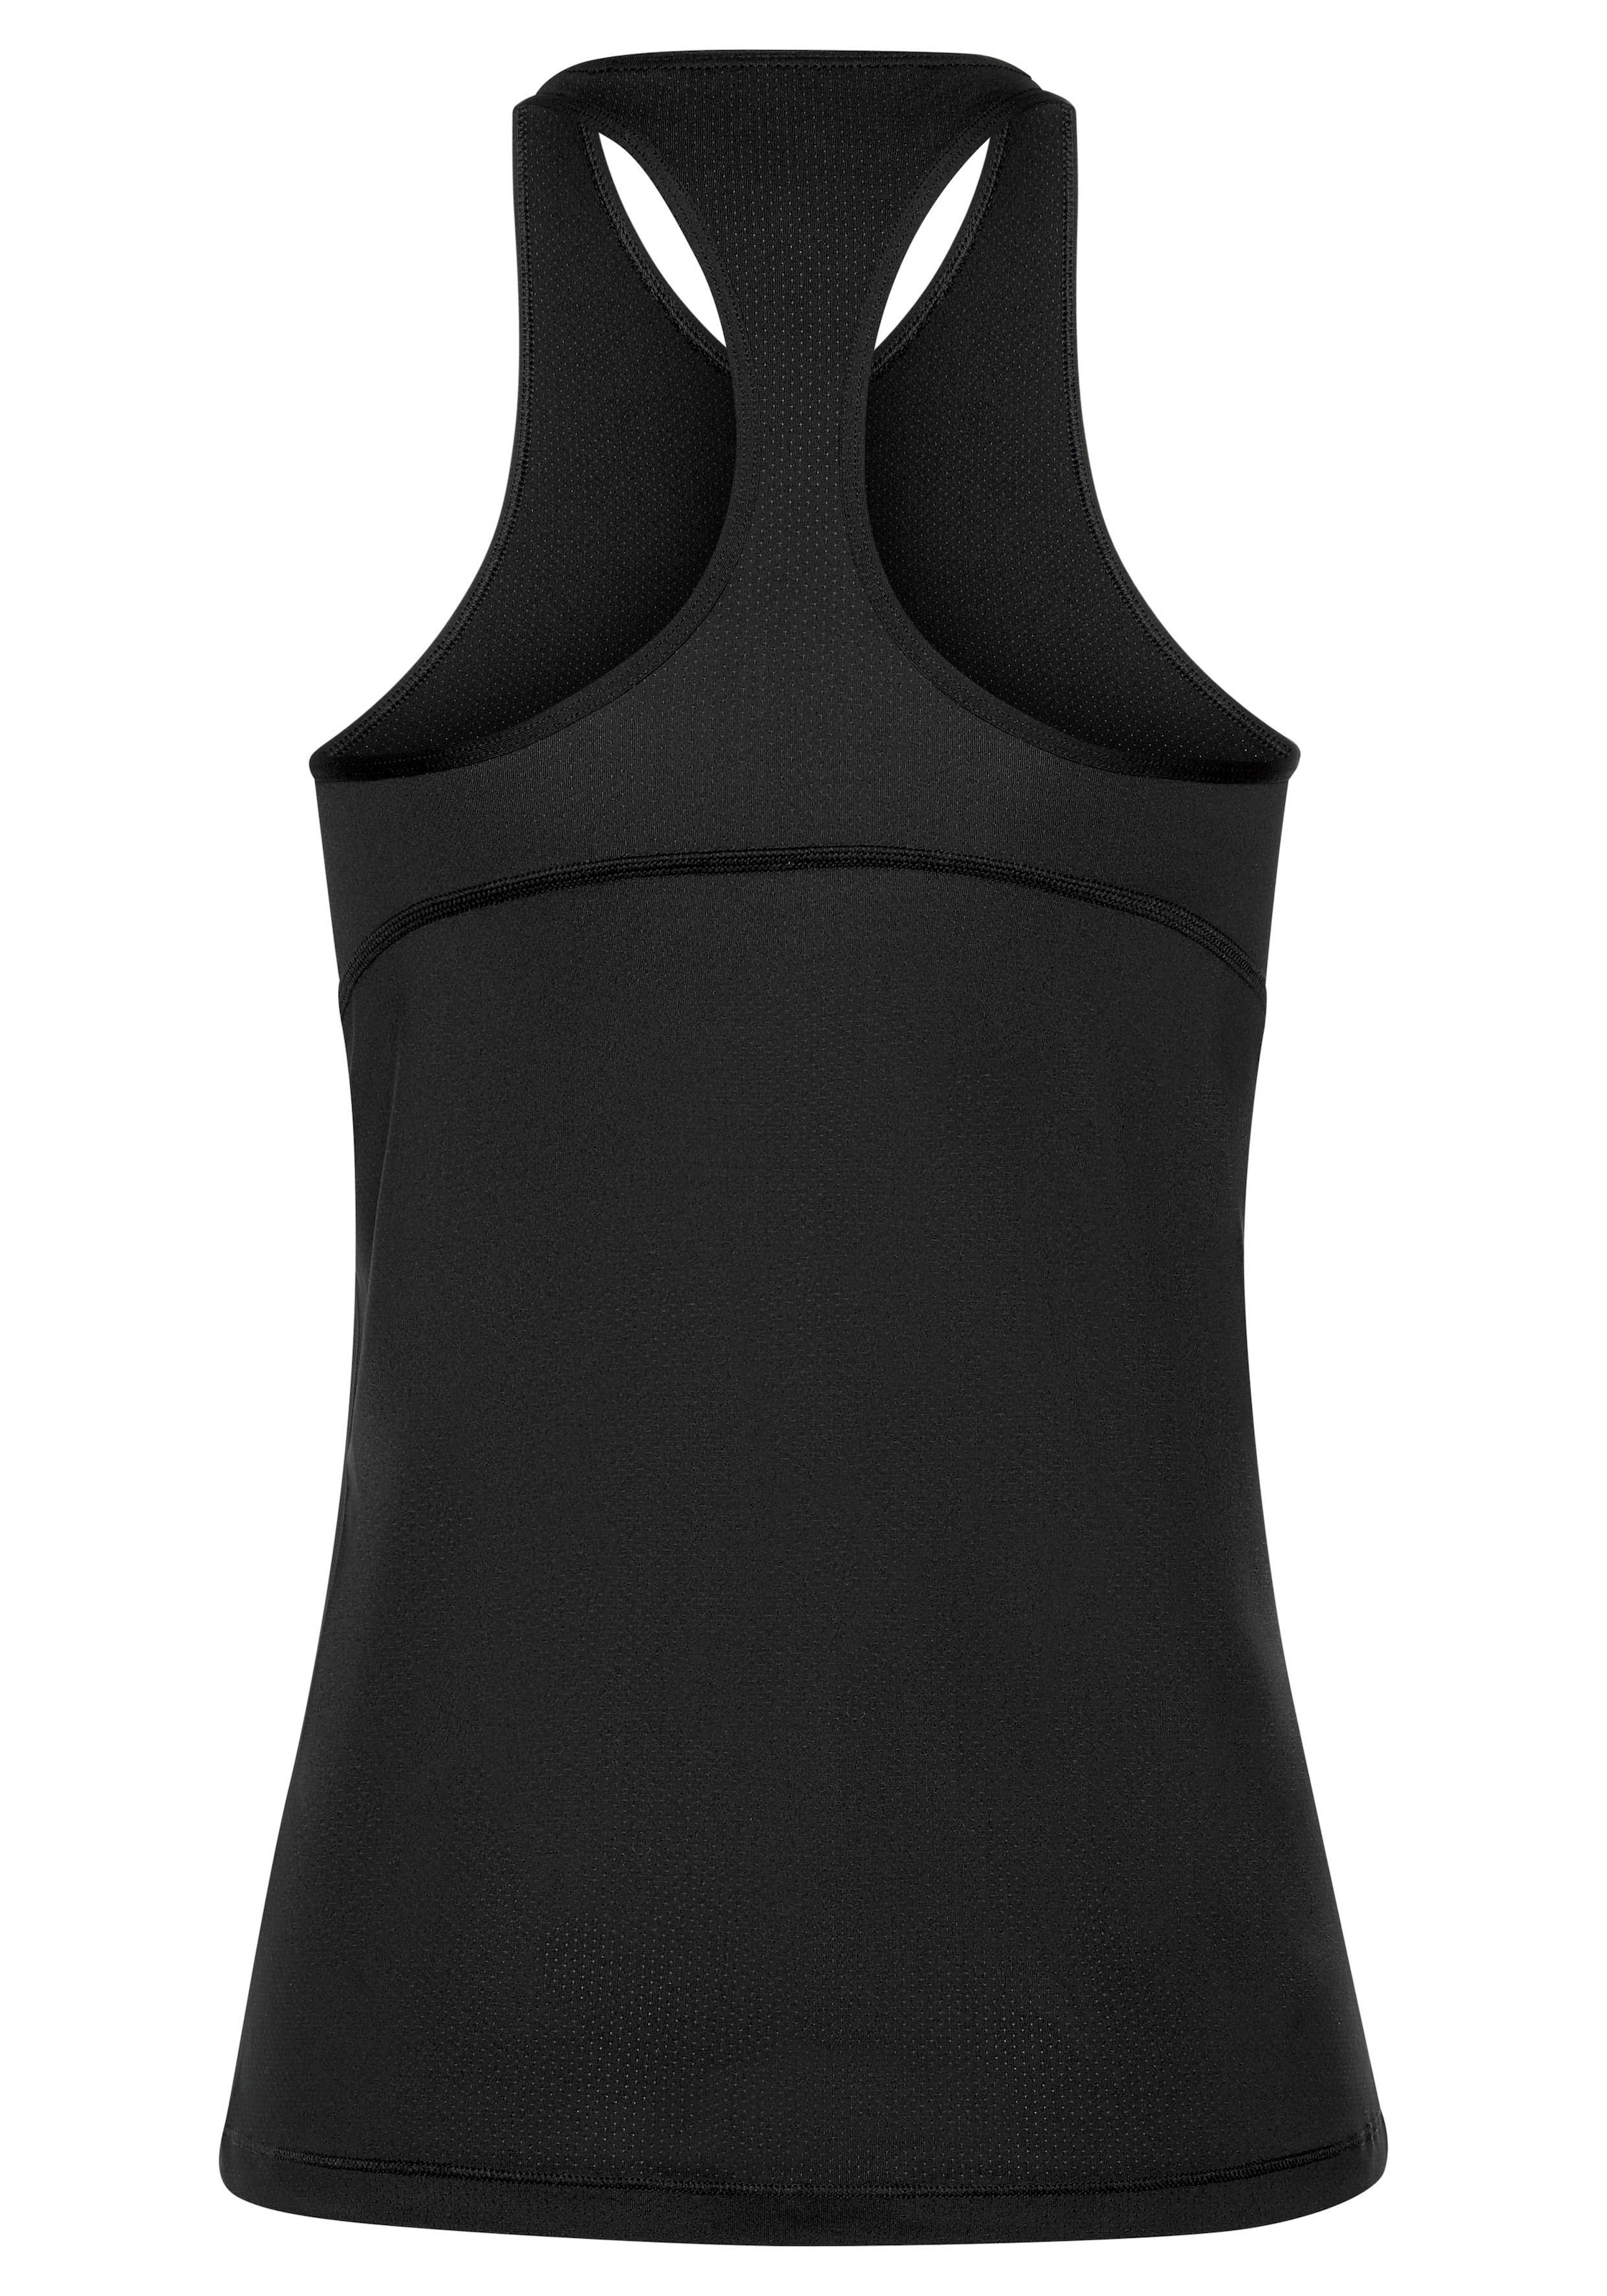 Nike MESH« OVER ALL online »WOMAN Funktionstop TANK NP